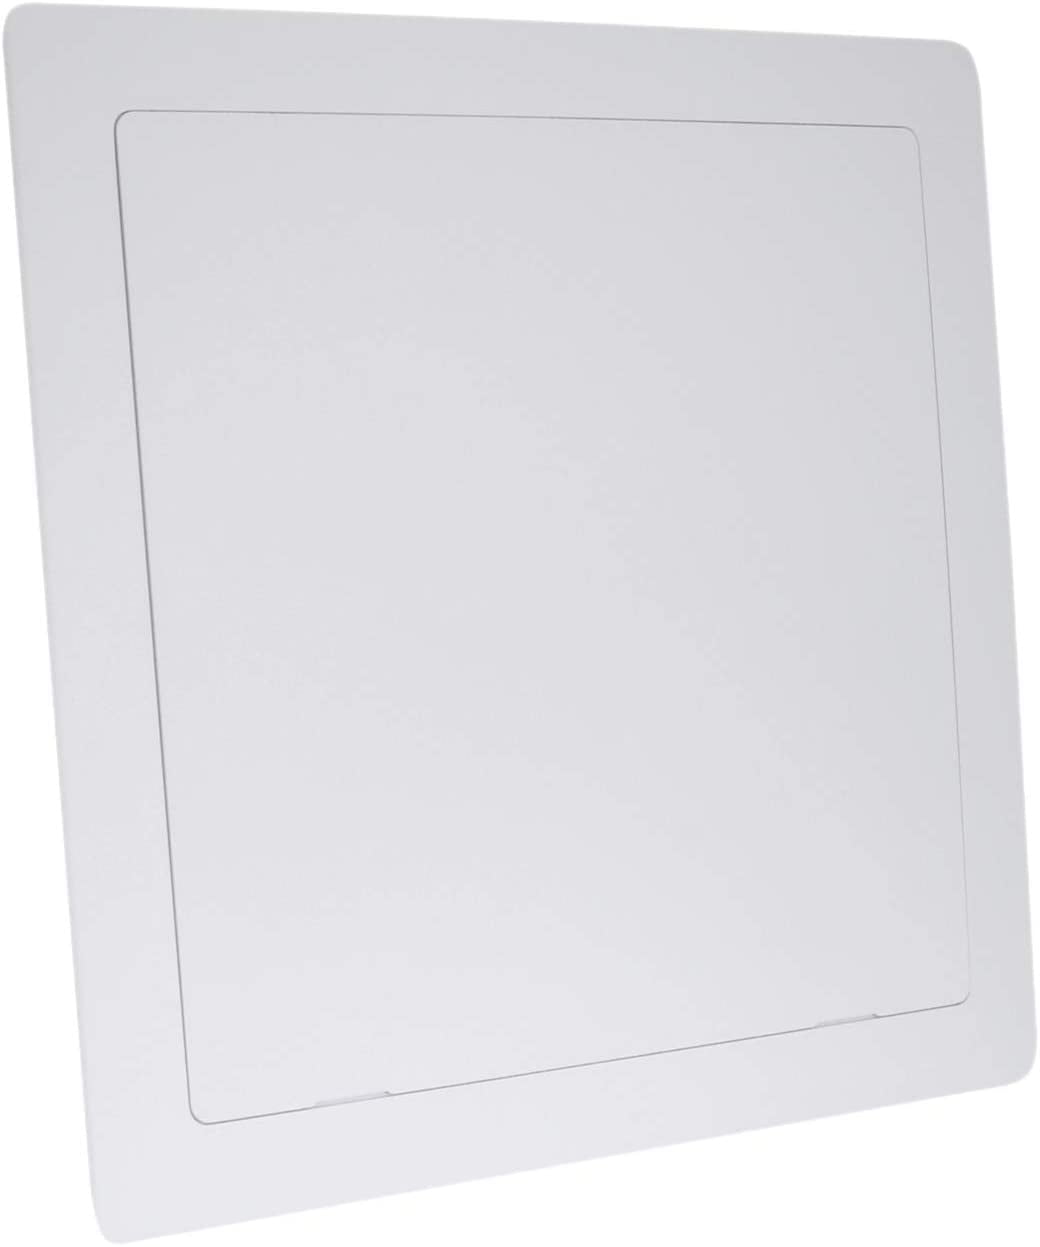 4X6 MaRoner Reinforced Hinged Plastic Access Panel for Drywall Ceiling 4 x 6 Inch White Access Doors Reinforced Hinged Access Panel 